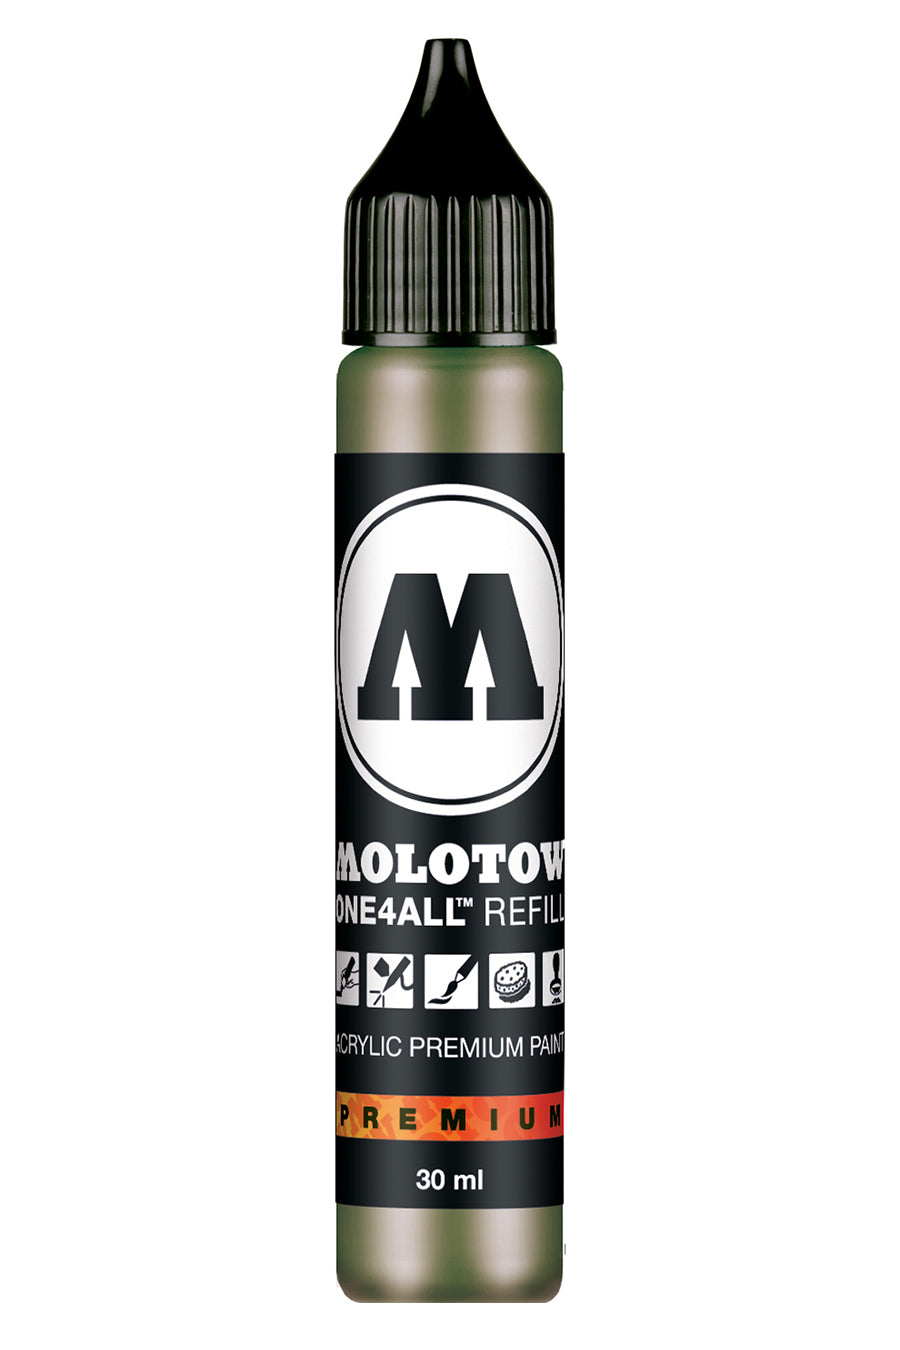 Molotow® ONE4ALL™ Refills Gray Color Family